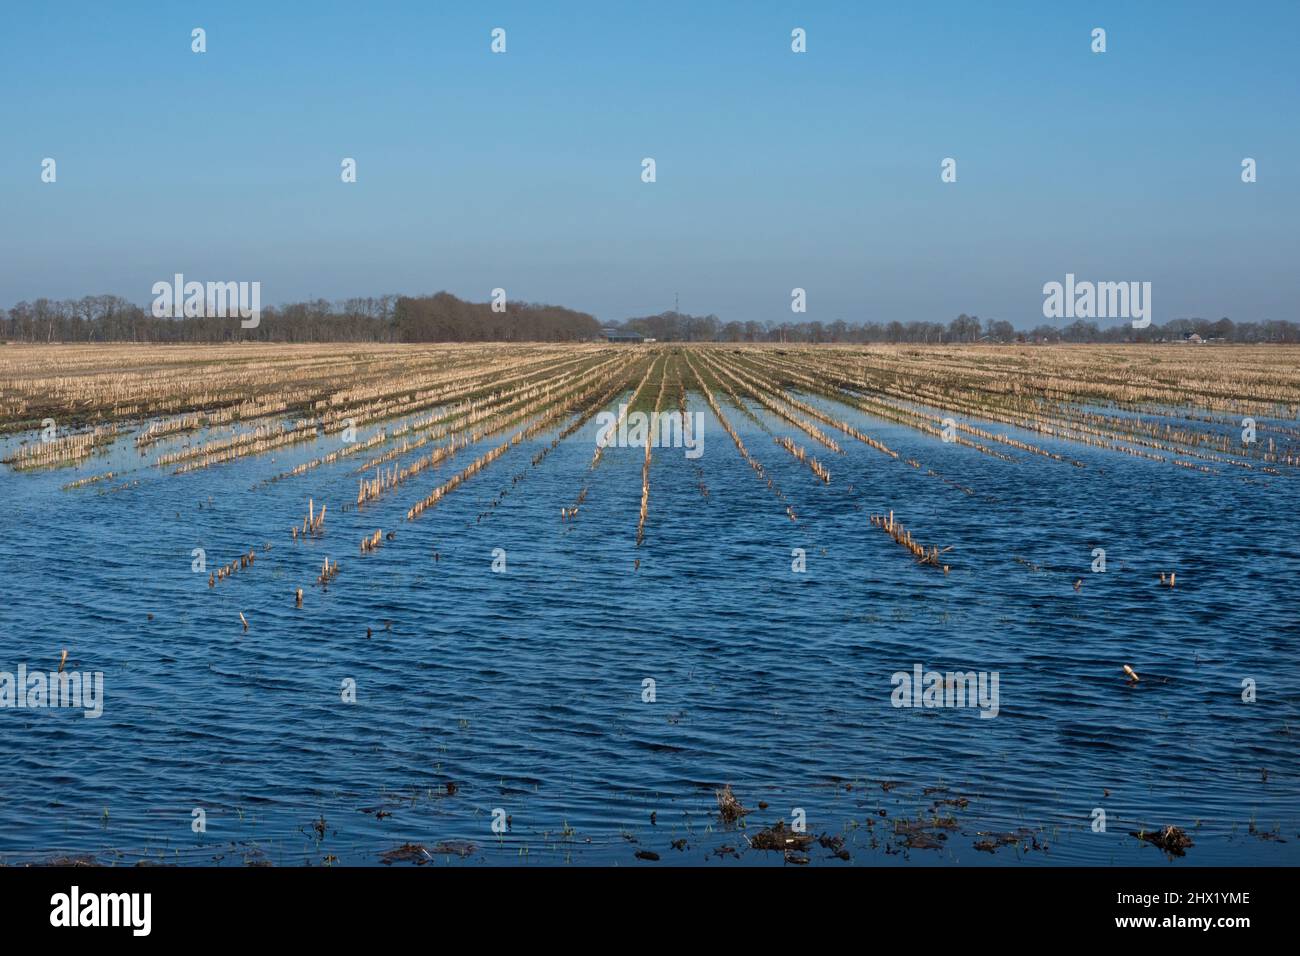 Muddy maize field after bad weather, flooded after heavy rains in winter Stock Photo